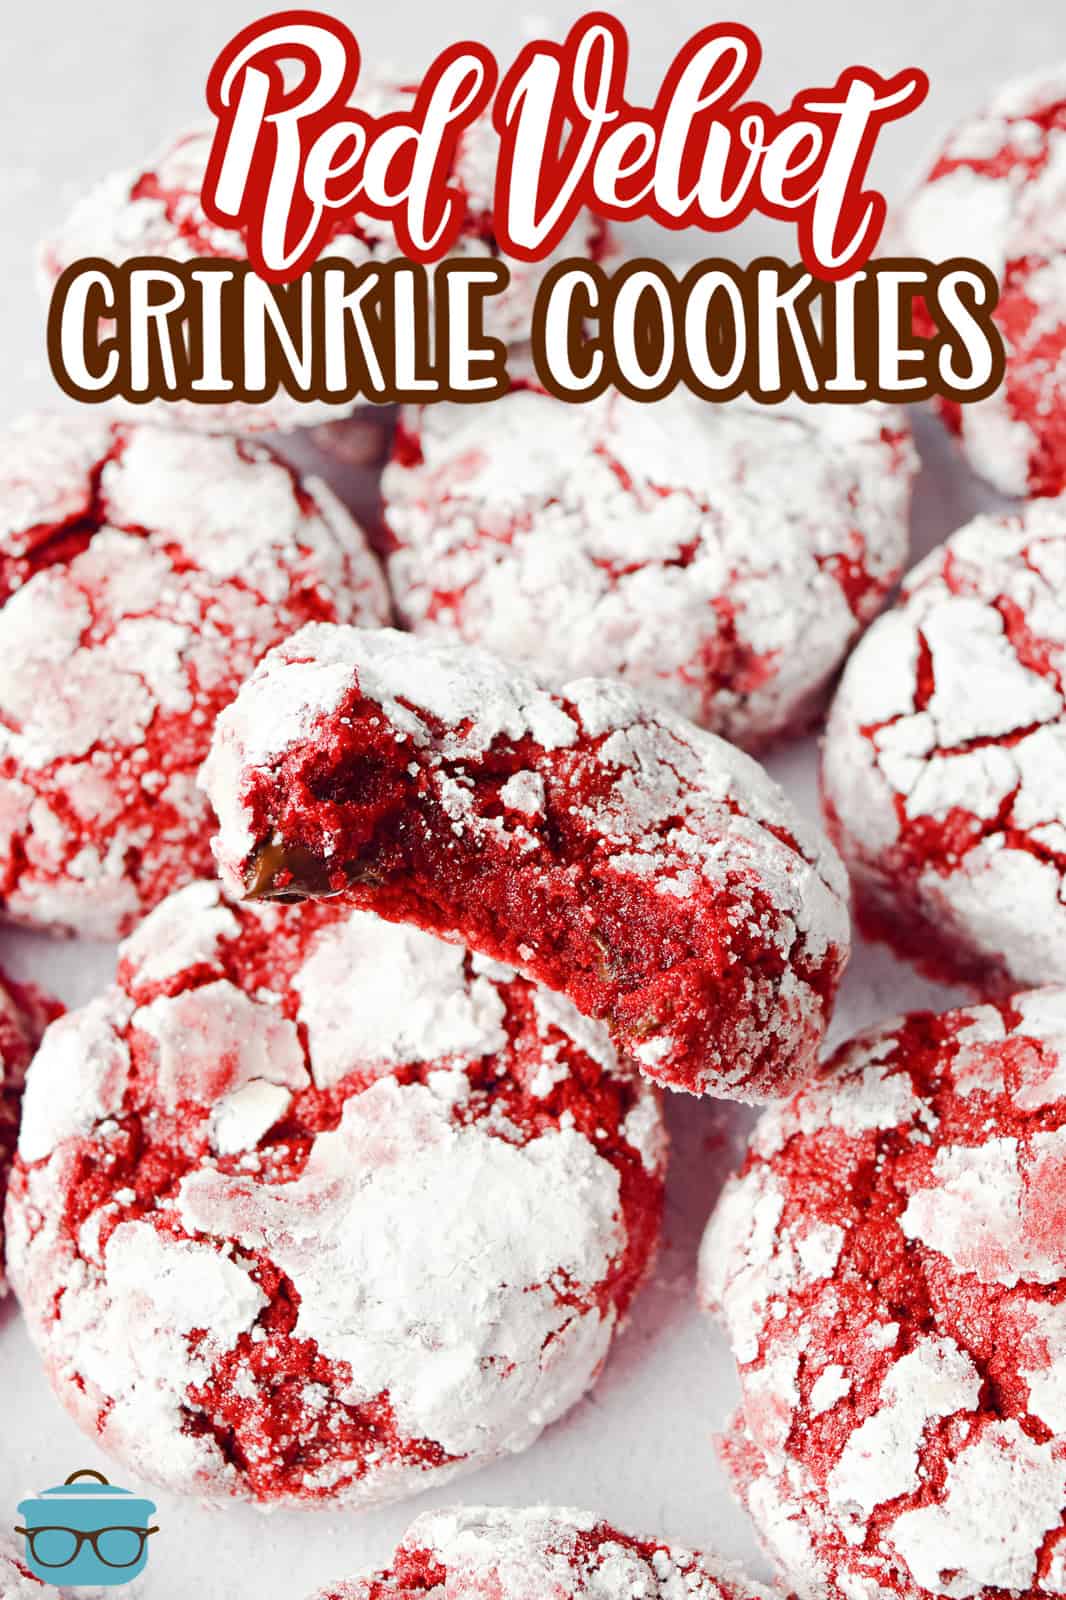 Stacked Red Velvet Crinkle Cookies showing one cookie standing up with bite taken out of it Pinterest image.